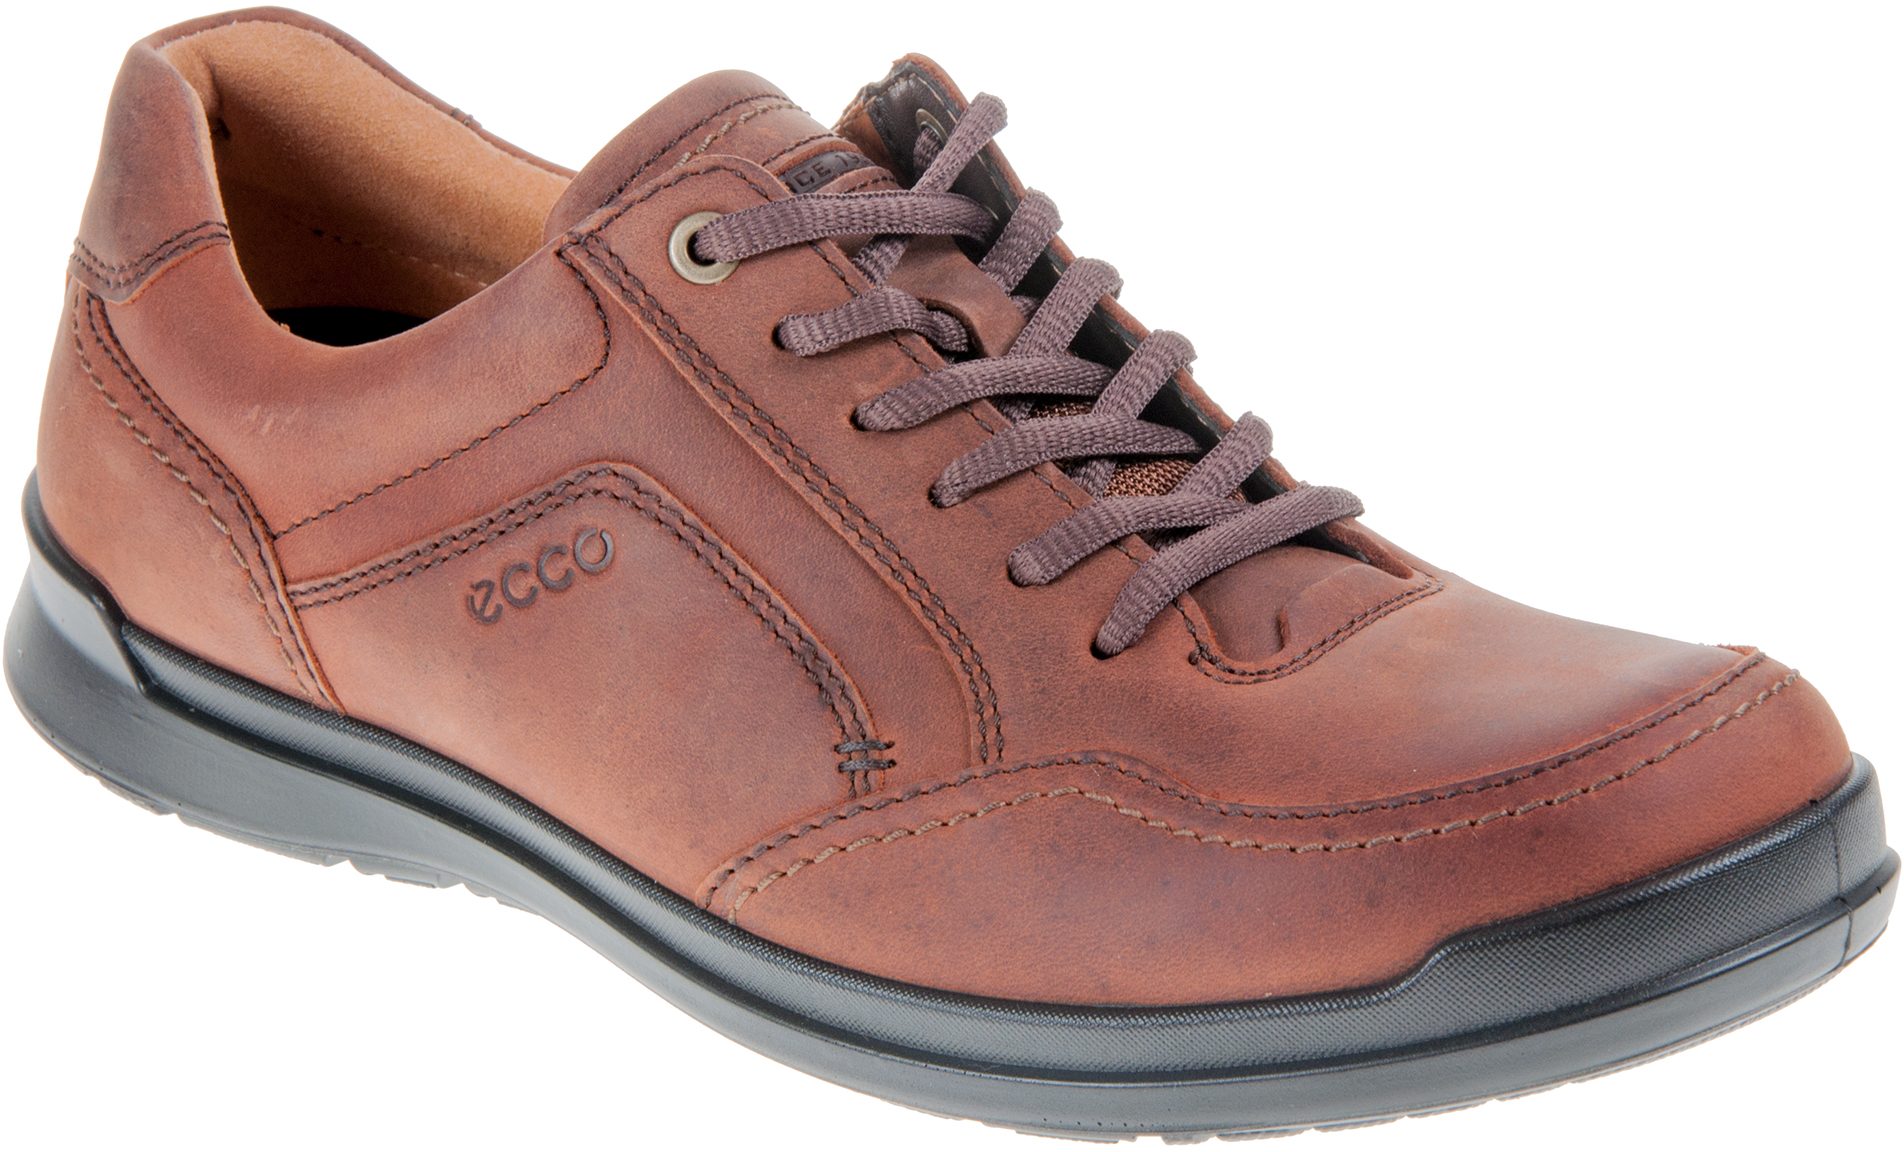 Ecco Howell Cognac 524534 02053 - Casual Shoes - Humphries Shoes